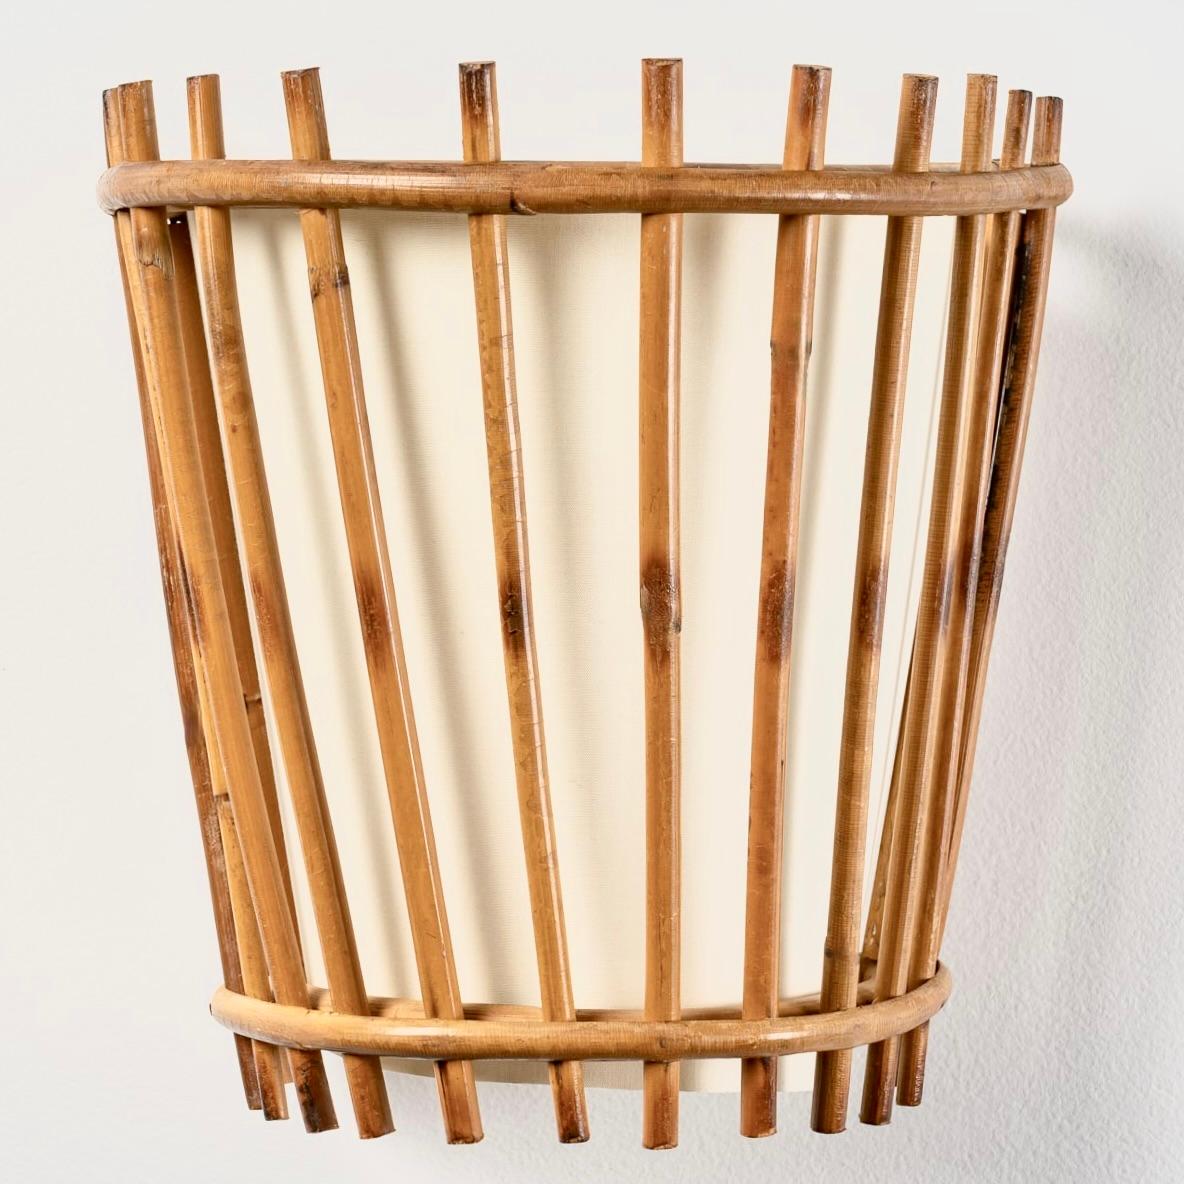 Composed of thin rattan rods placed vertically and assembled by two curved rattan rods placed horizontally on the top and bottom of the sconce.
An off-white cotton lampshade is placed inside the sconce following the curved cord.
1 bulb.